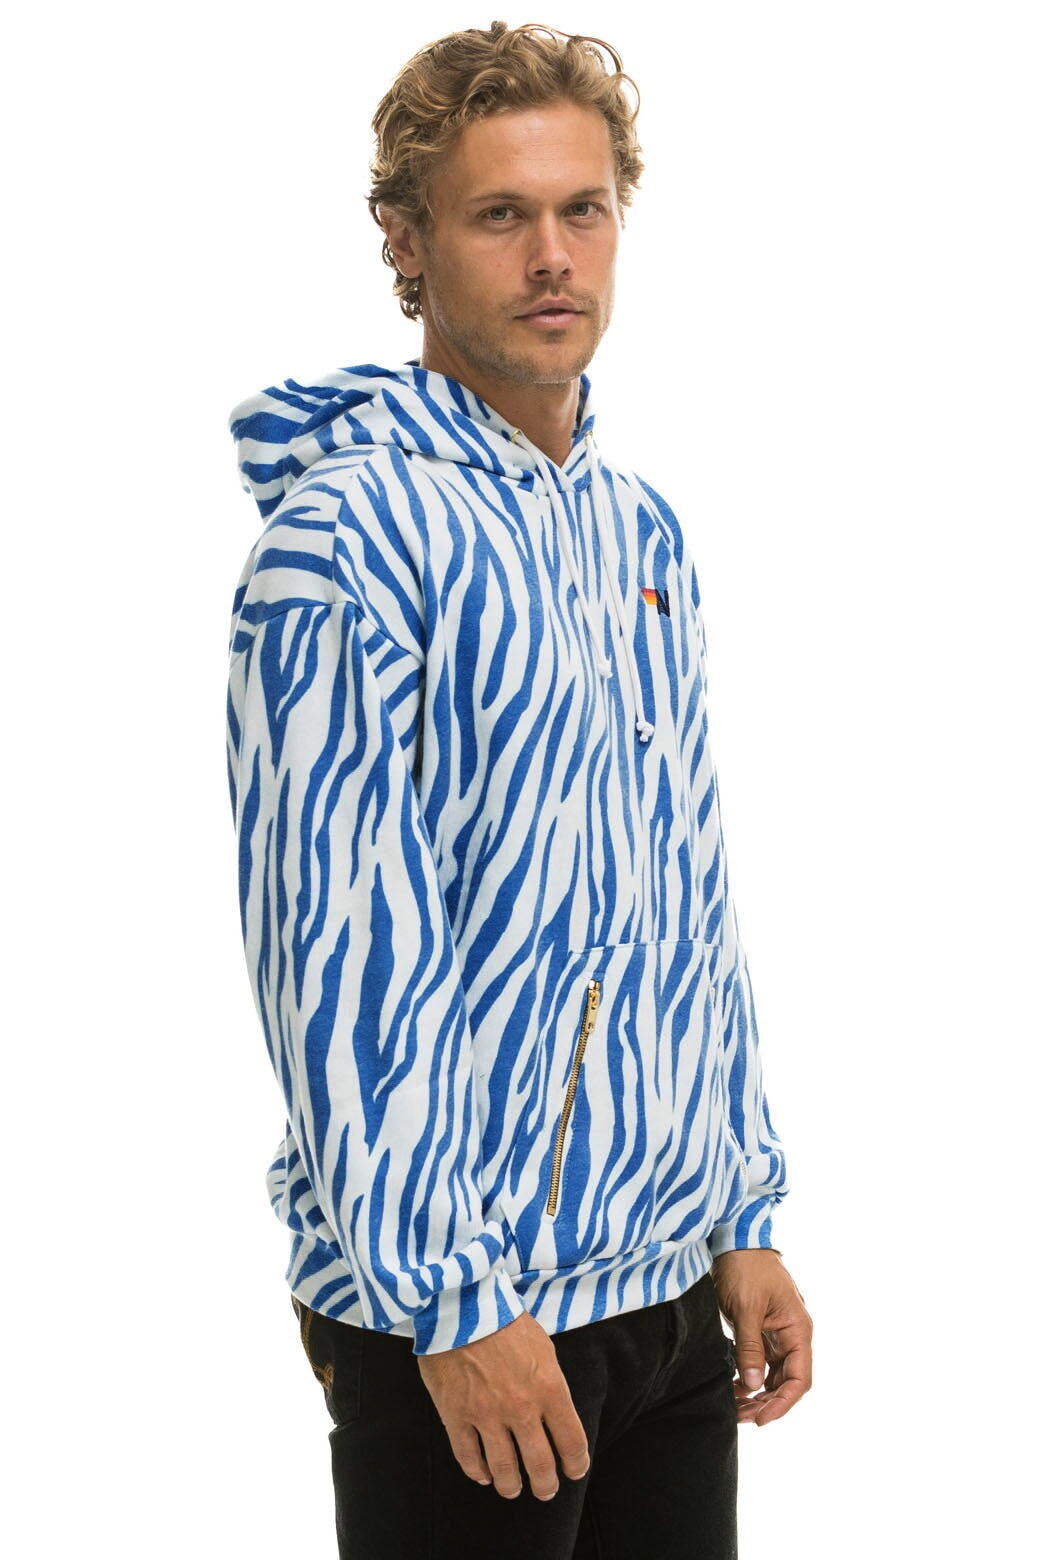 TIGER RELAXED PULLOVER HOODIE WITH ZIPPER POCKETS - BLUE TIGER Hoodie Aviator Nation 